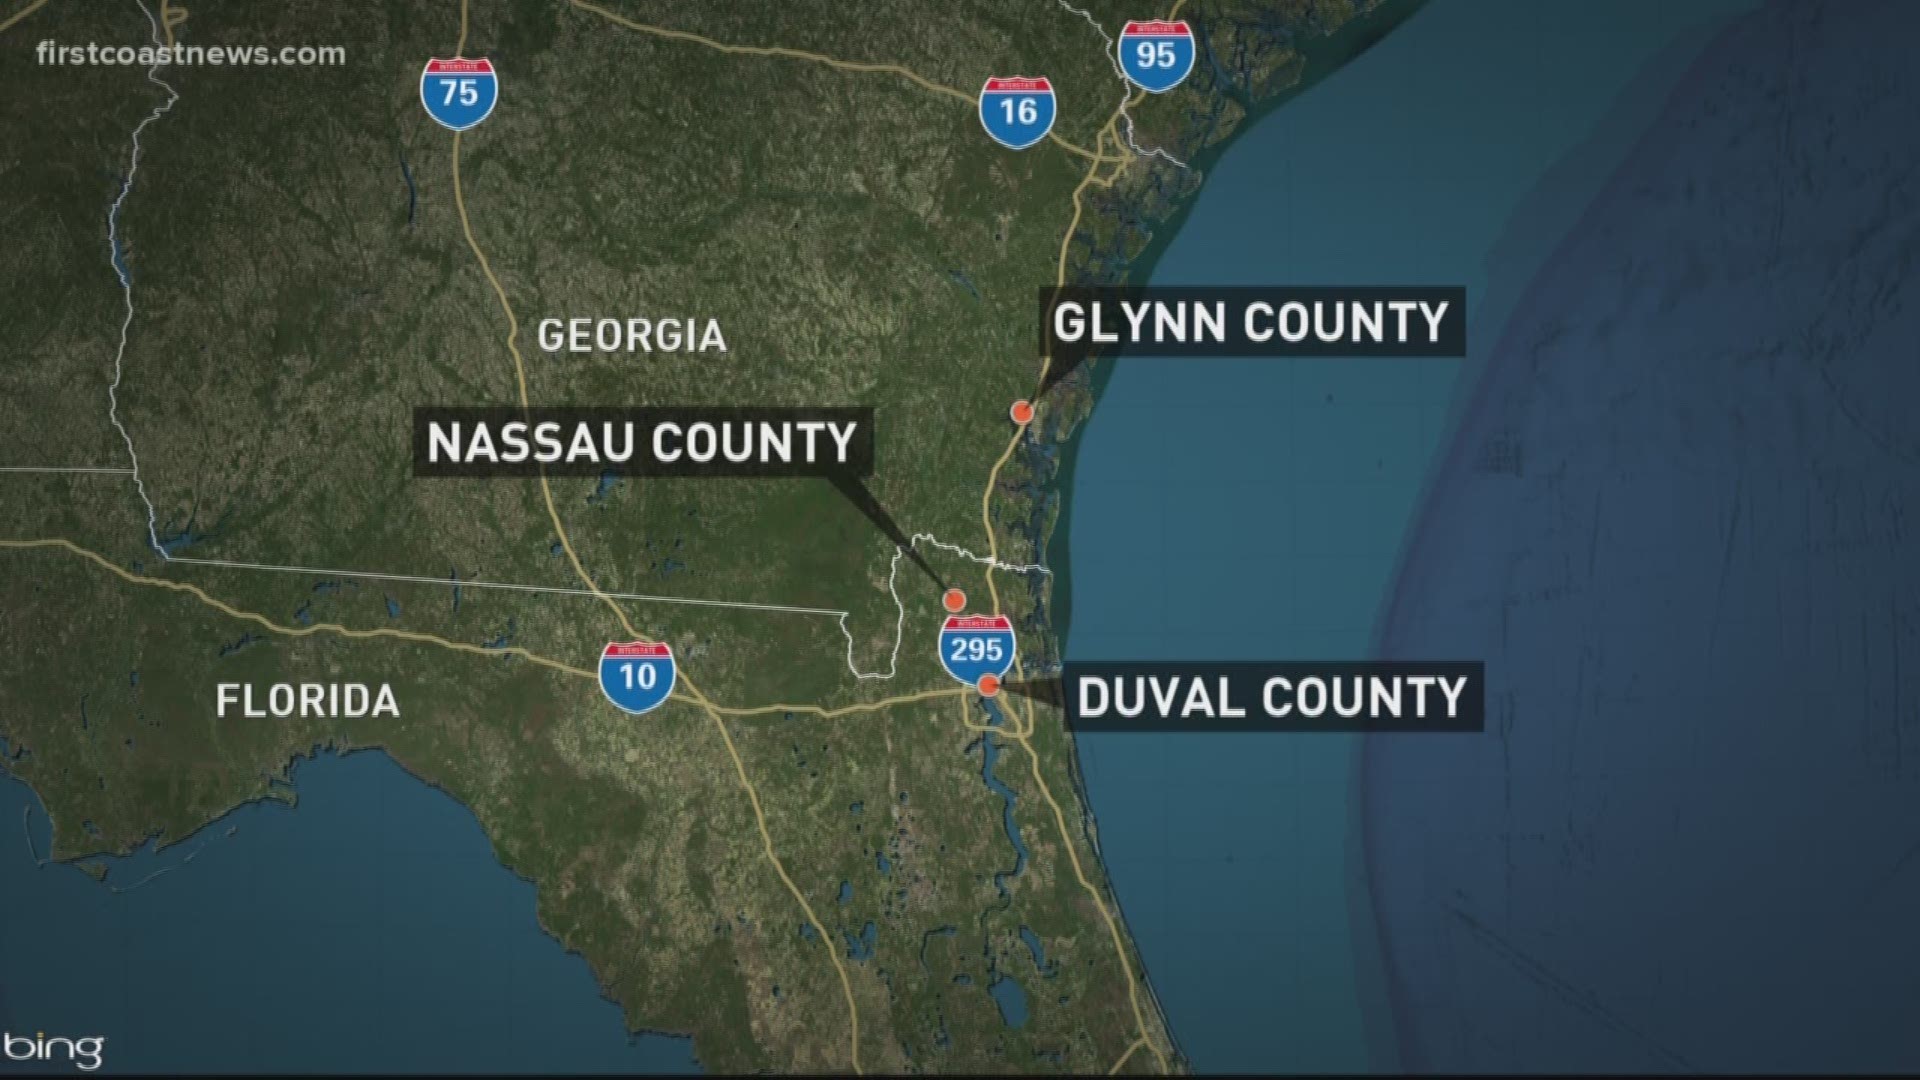 The Glynn County Public Works confirmed Friday that two mosquito samples in Brunswick, Georgia and on St. Simons Island have tested positive for the West Nile virus.